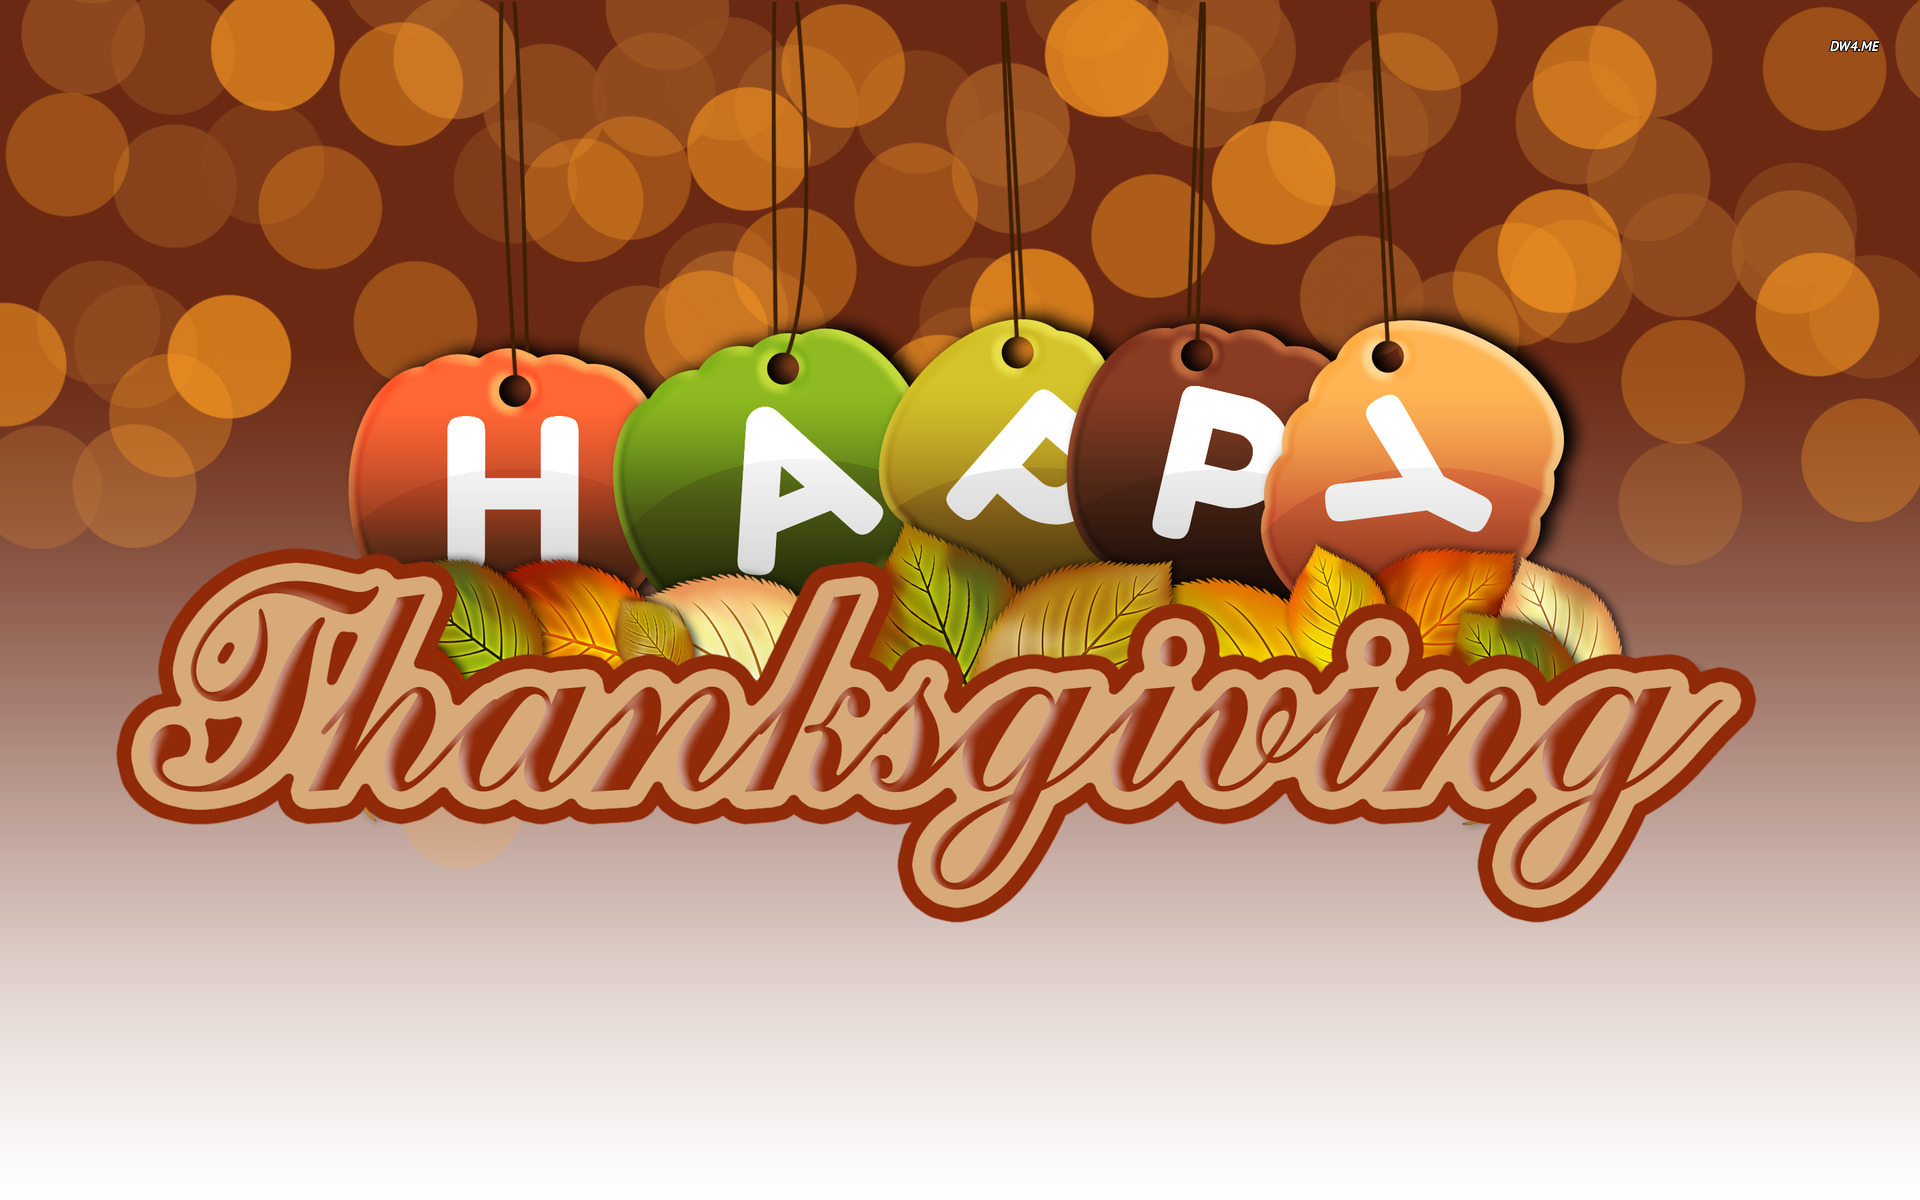 Happy Thanksgiving wallpaper Holiday wallpapers